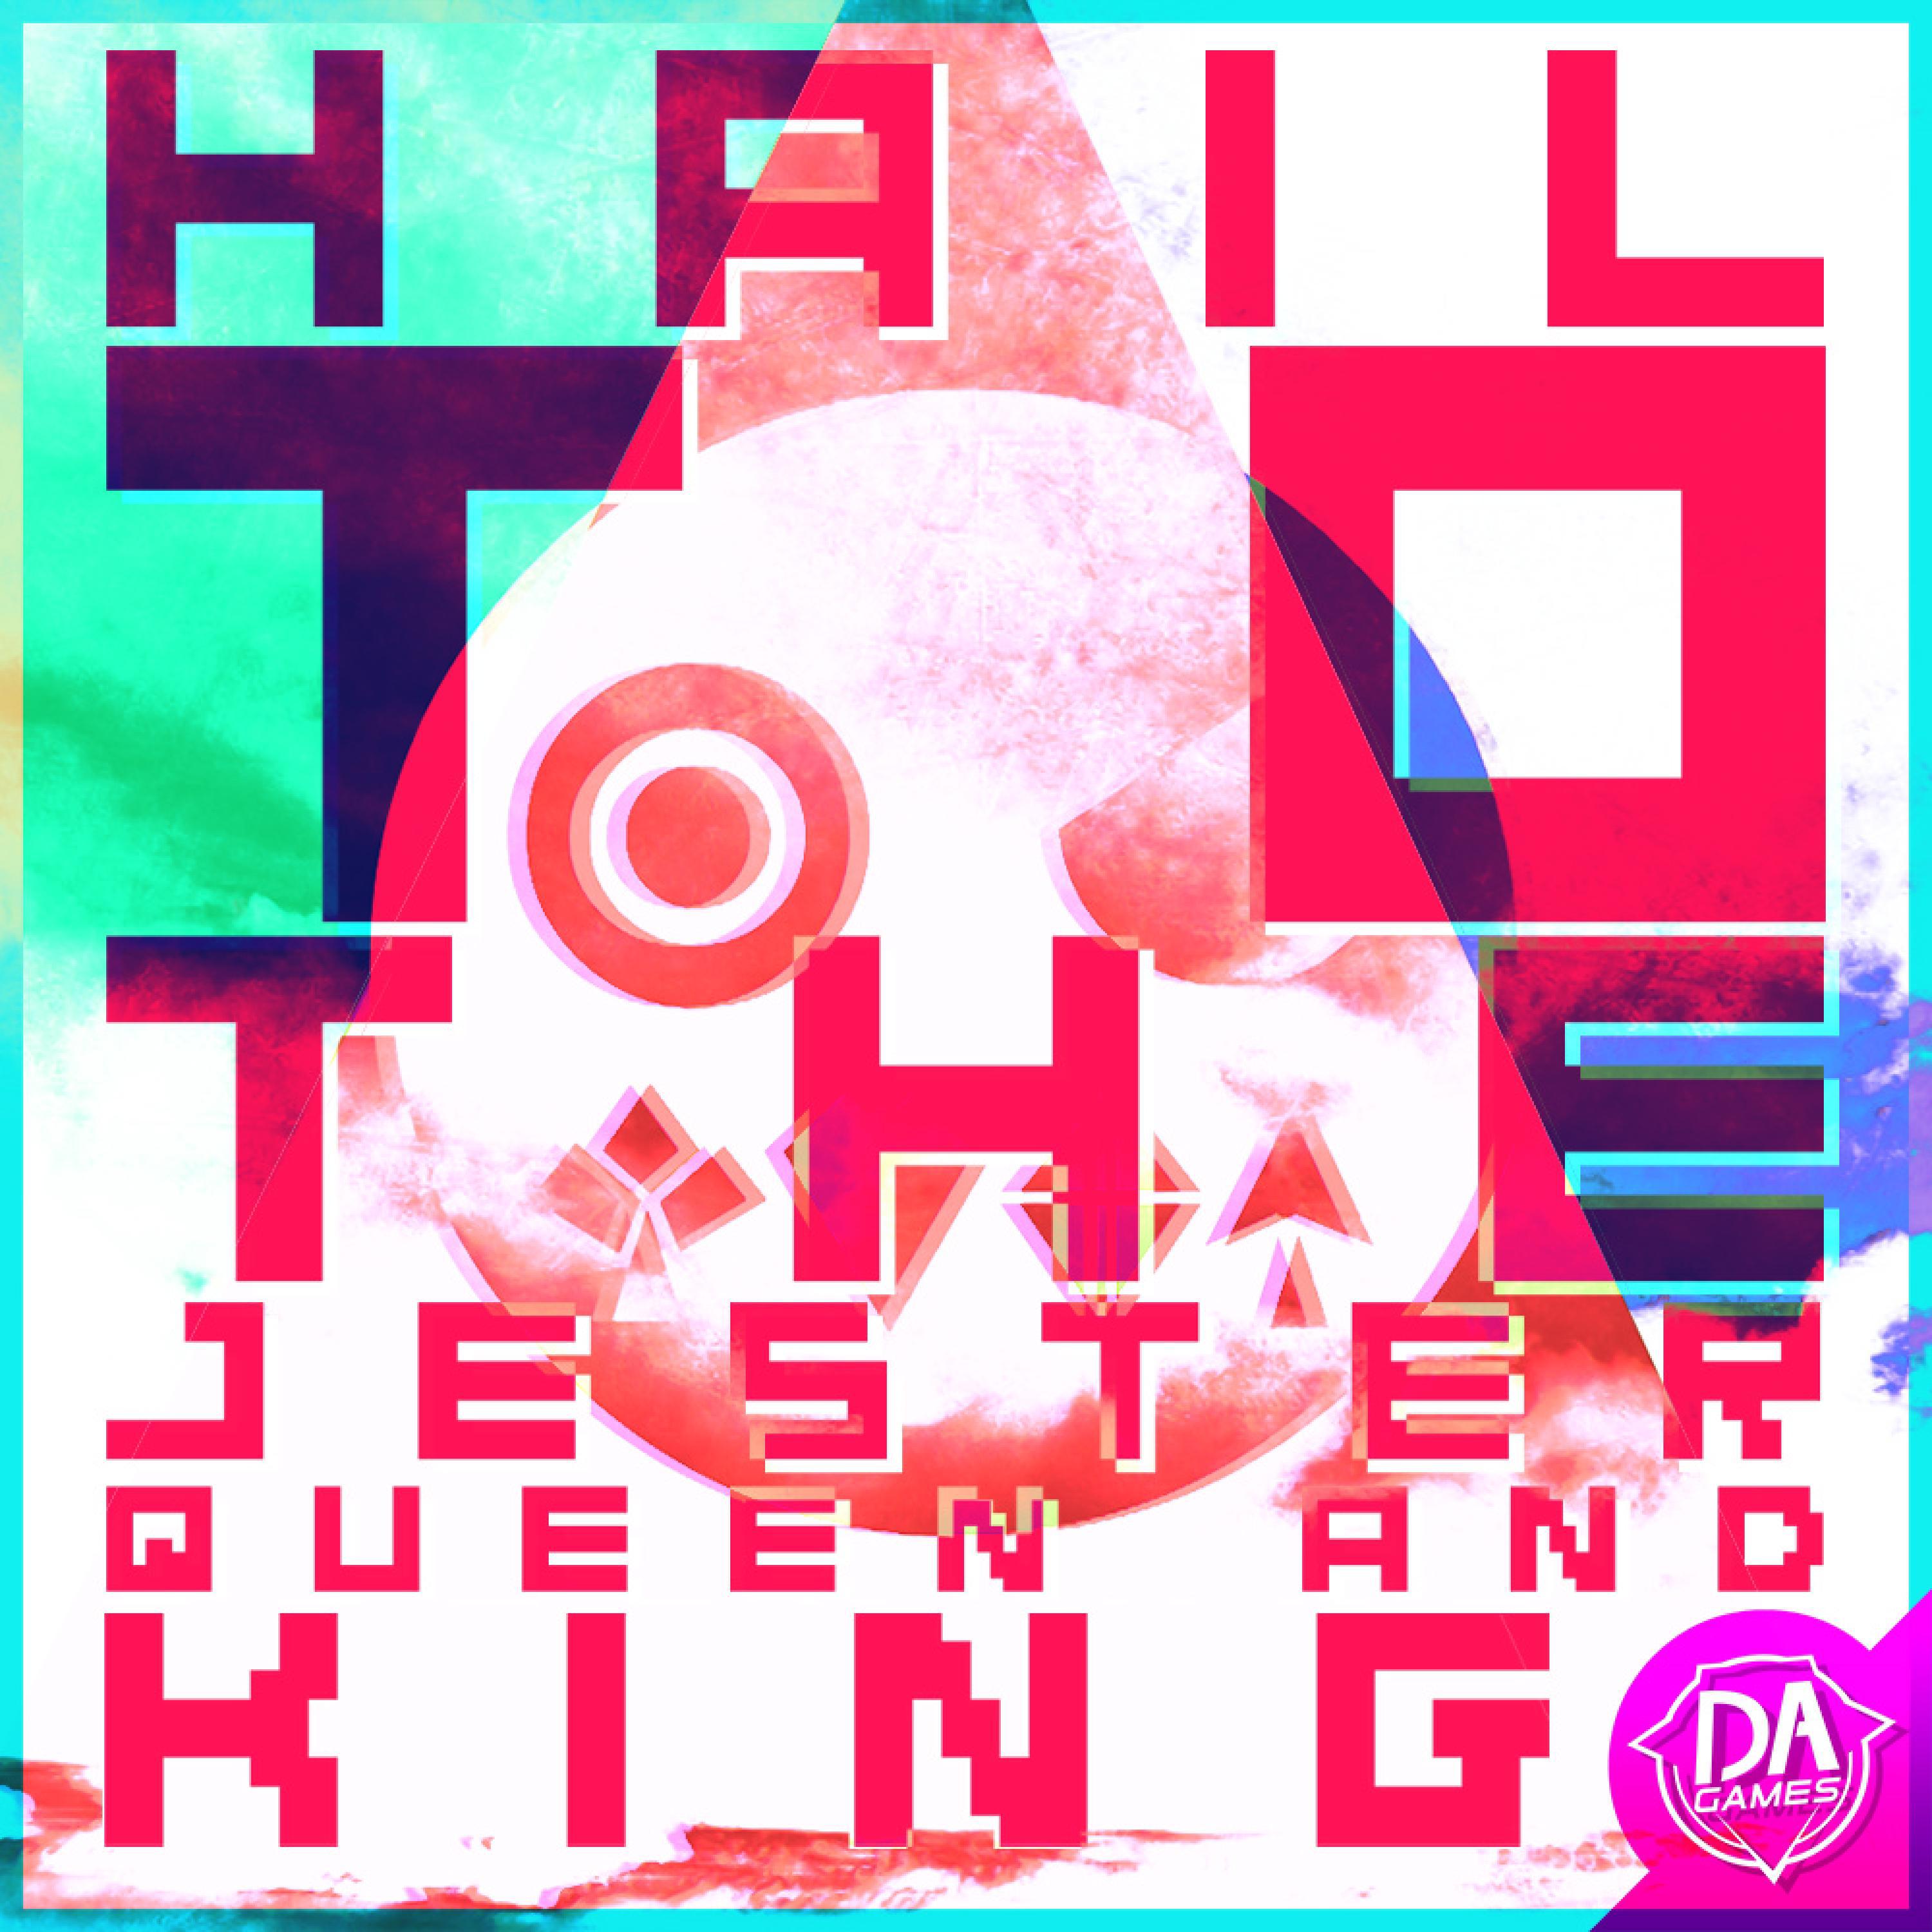 Dagames - Hail To The Jester Queen & King